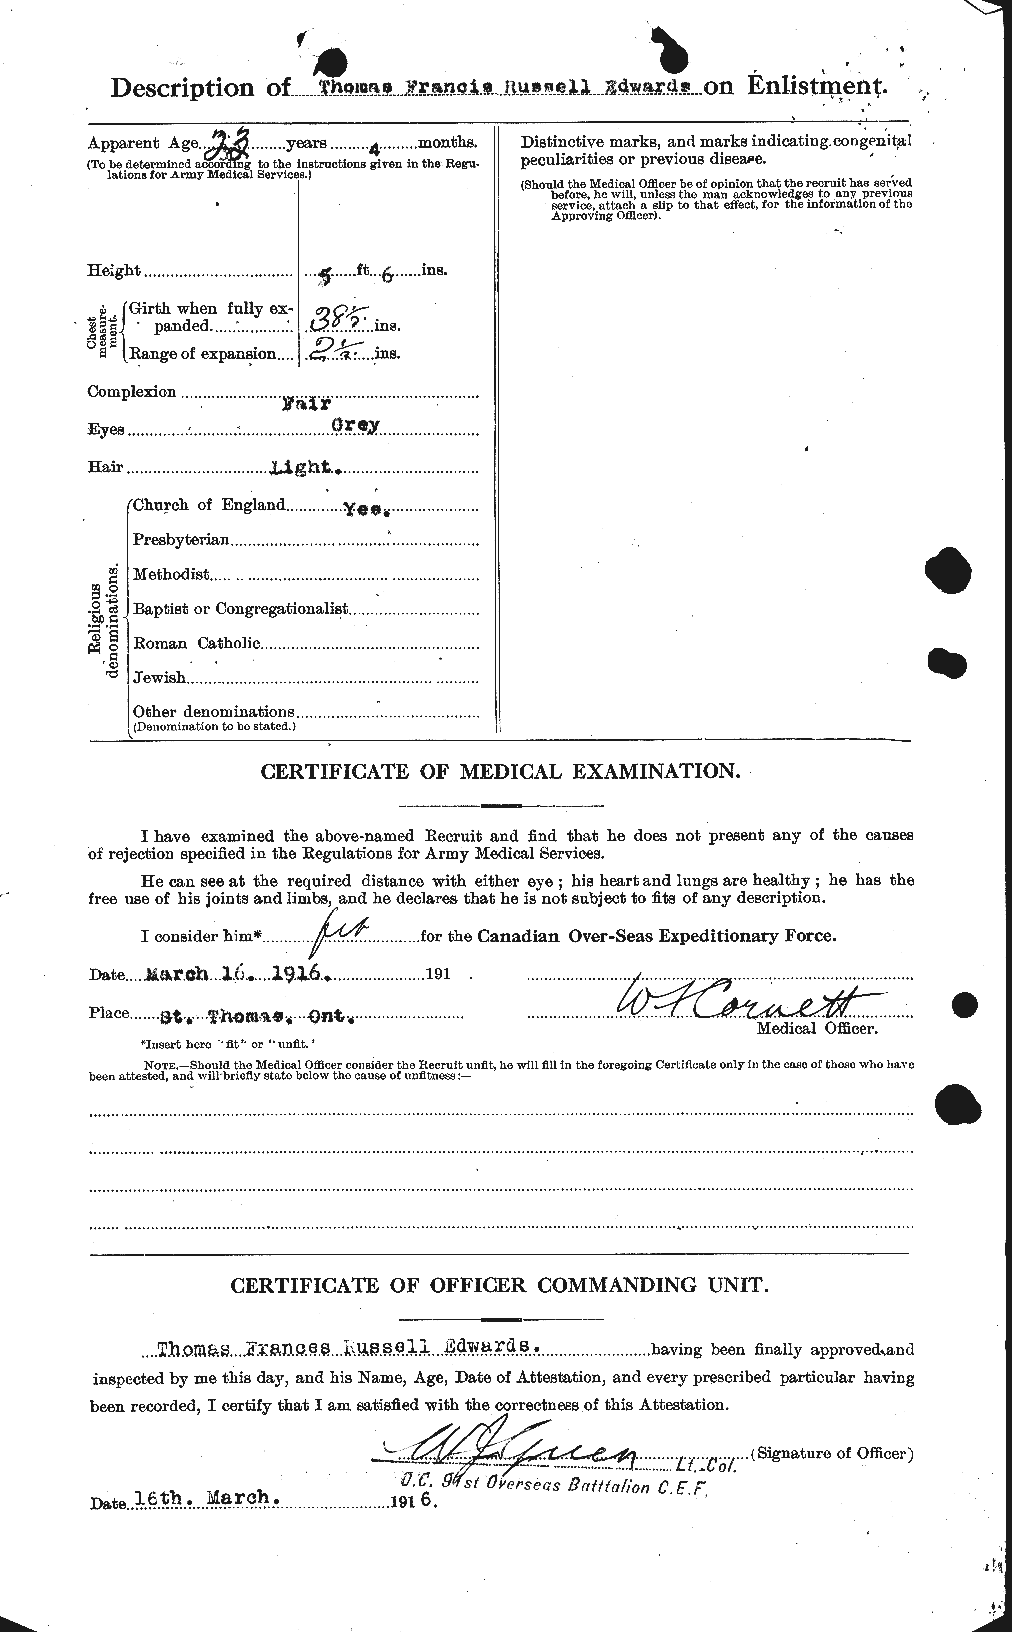 Personnel Records of the First World War - CEF 310345b